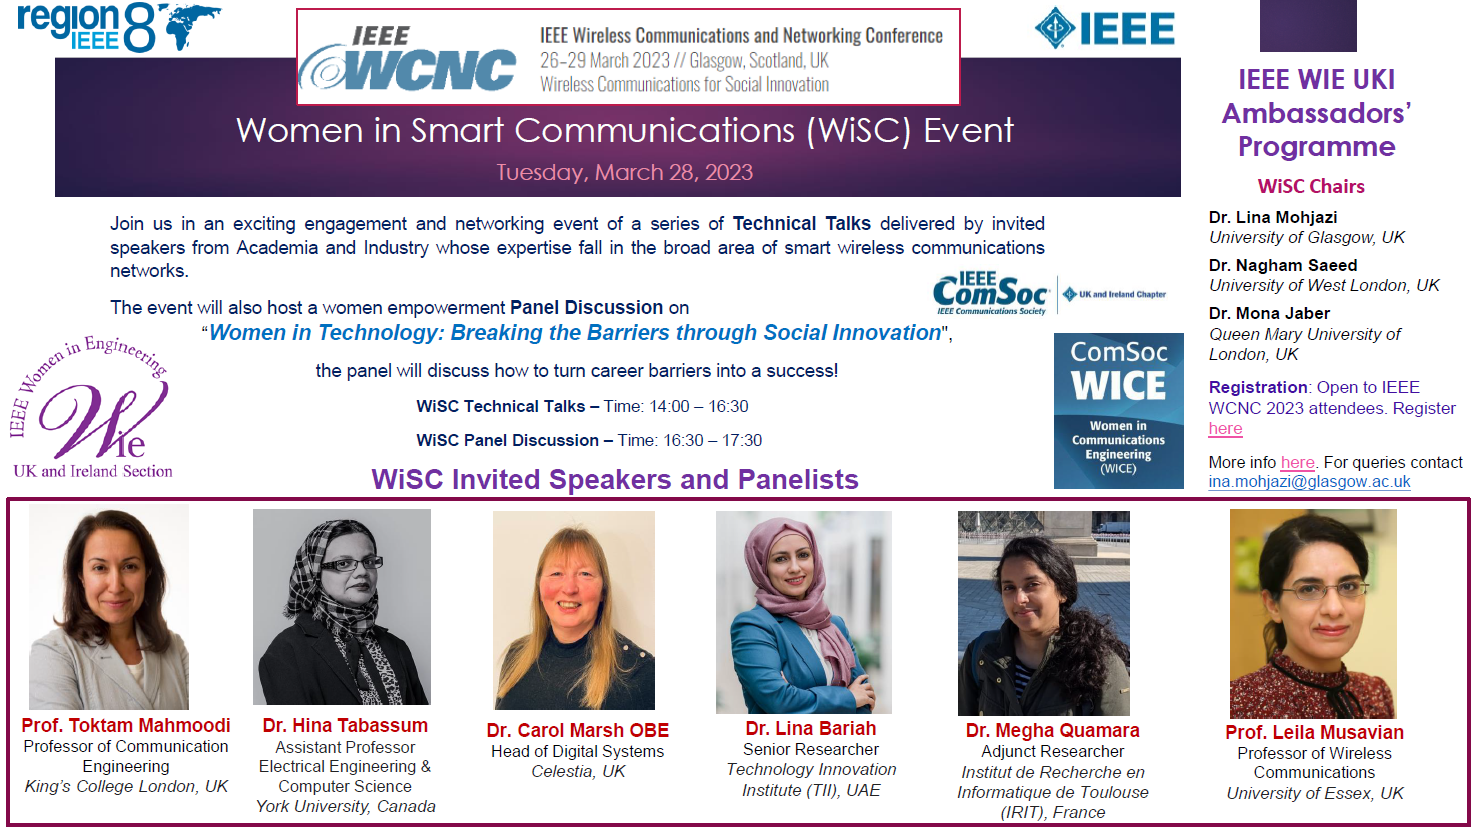 2023 IEEE WCNC, IEEE Wireless Communications and Networking Conference